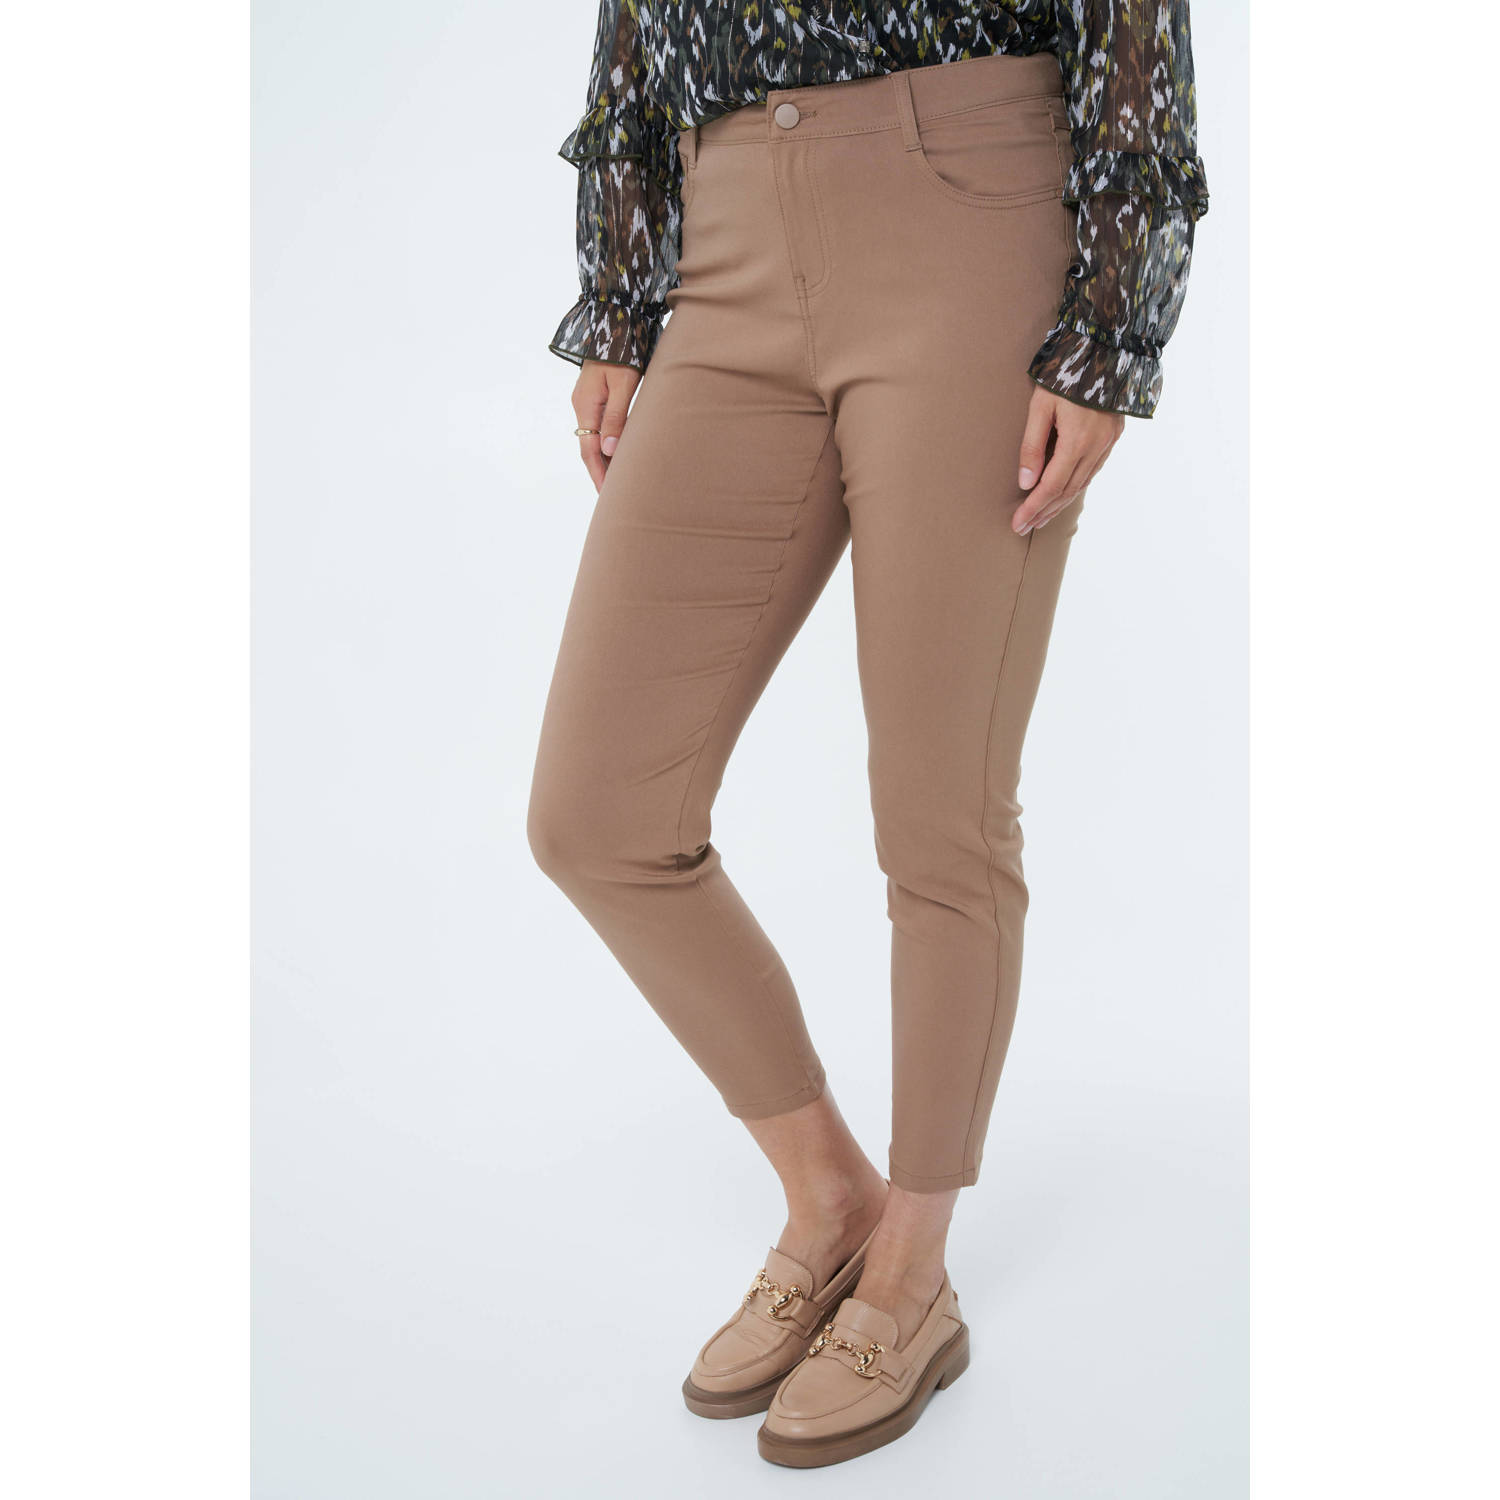 MS Mode jeans camel